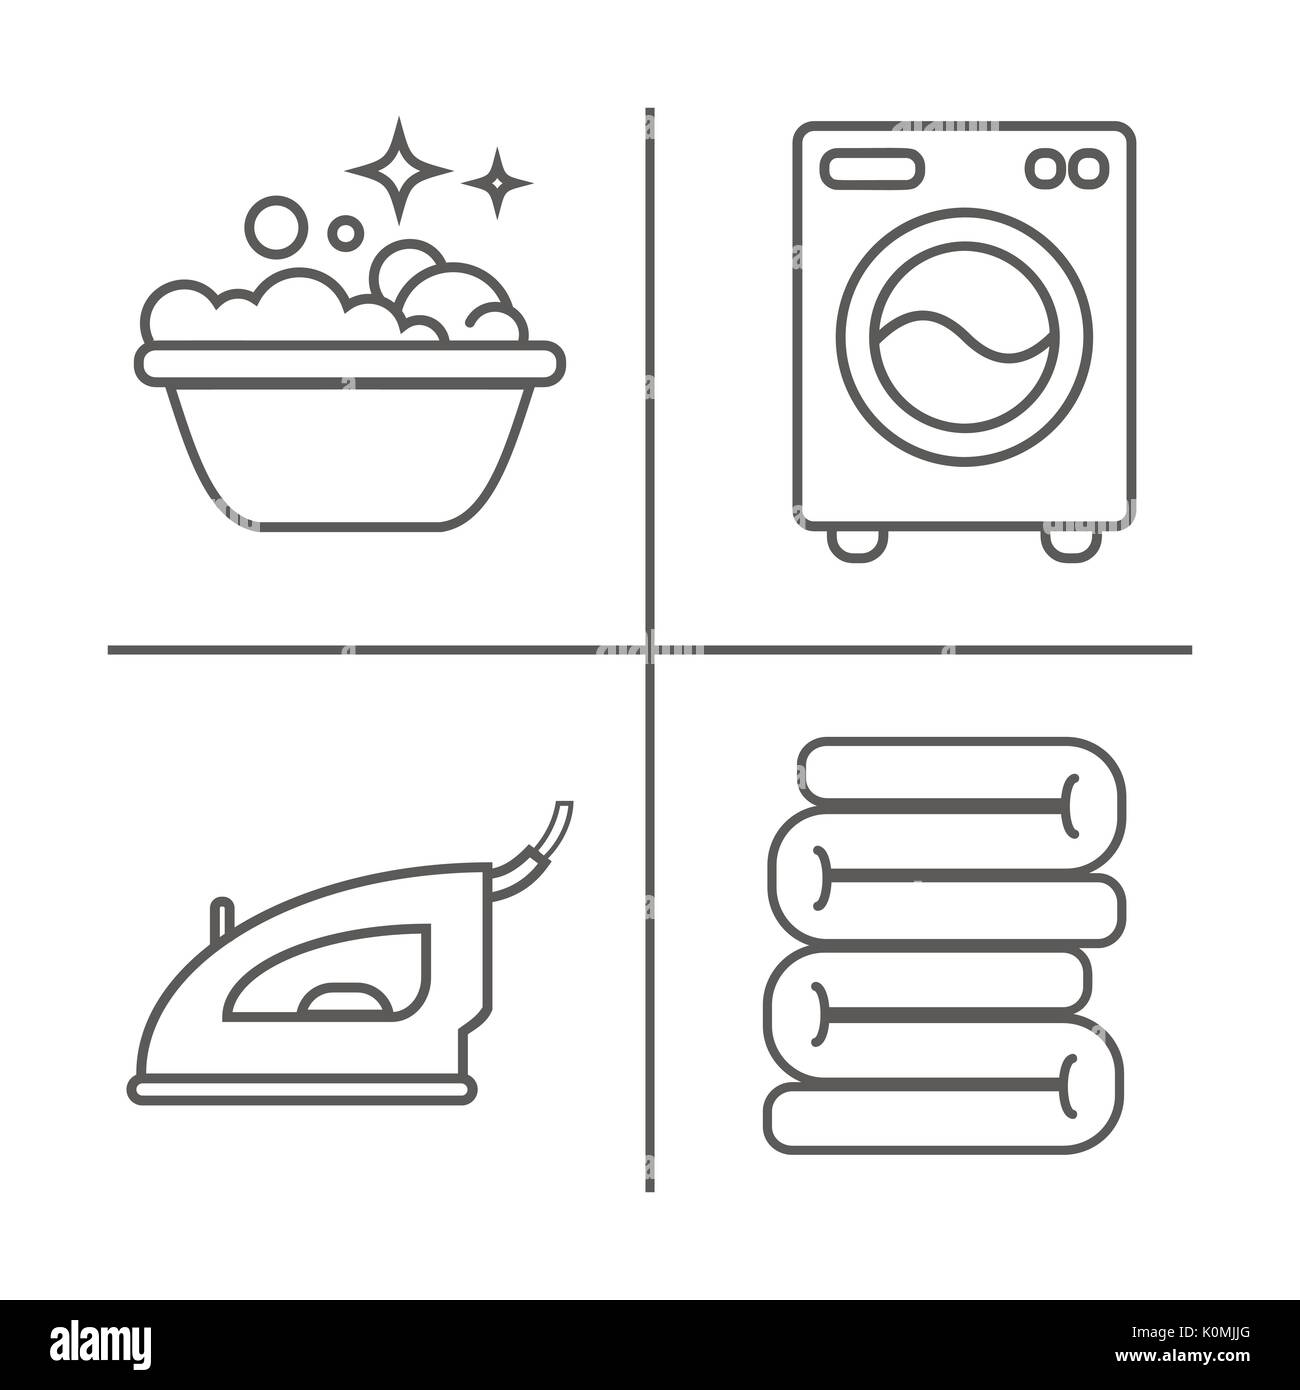 Washing, ironing, clean laundry line icons. Washing machine, iron, handwash and other clining icon. Order in the house linear signs for cleaning service Stock Vector